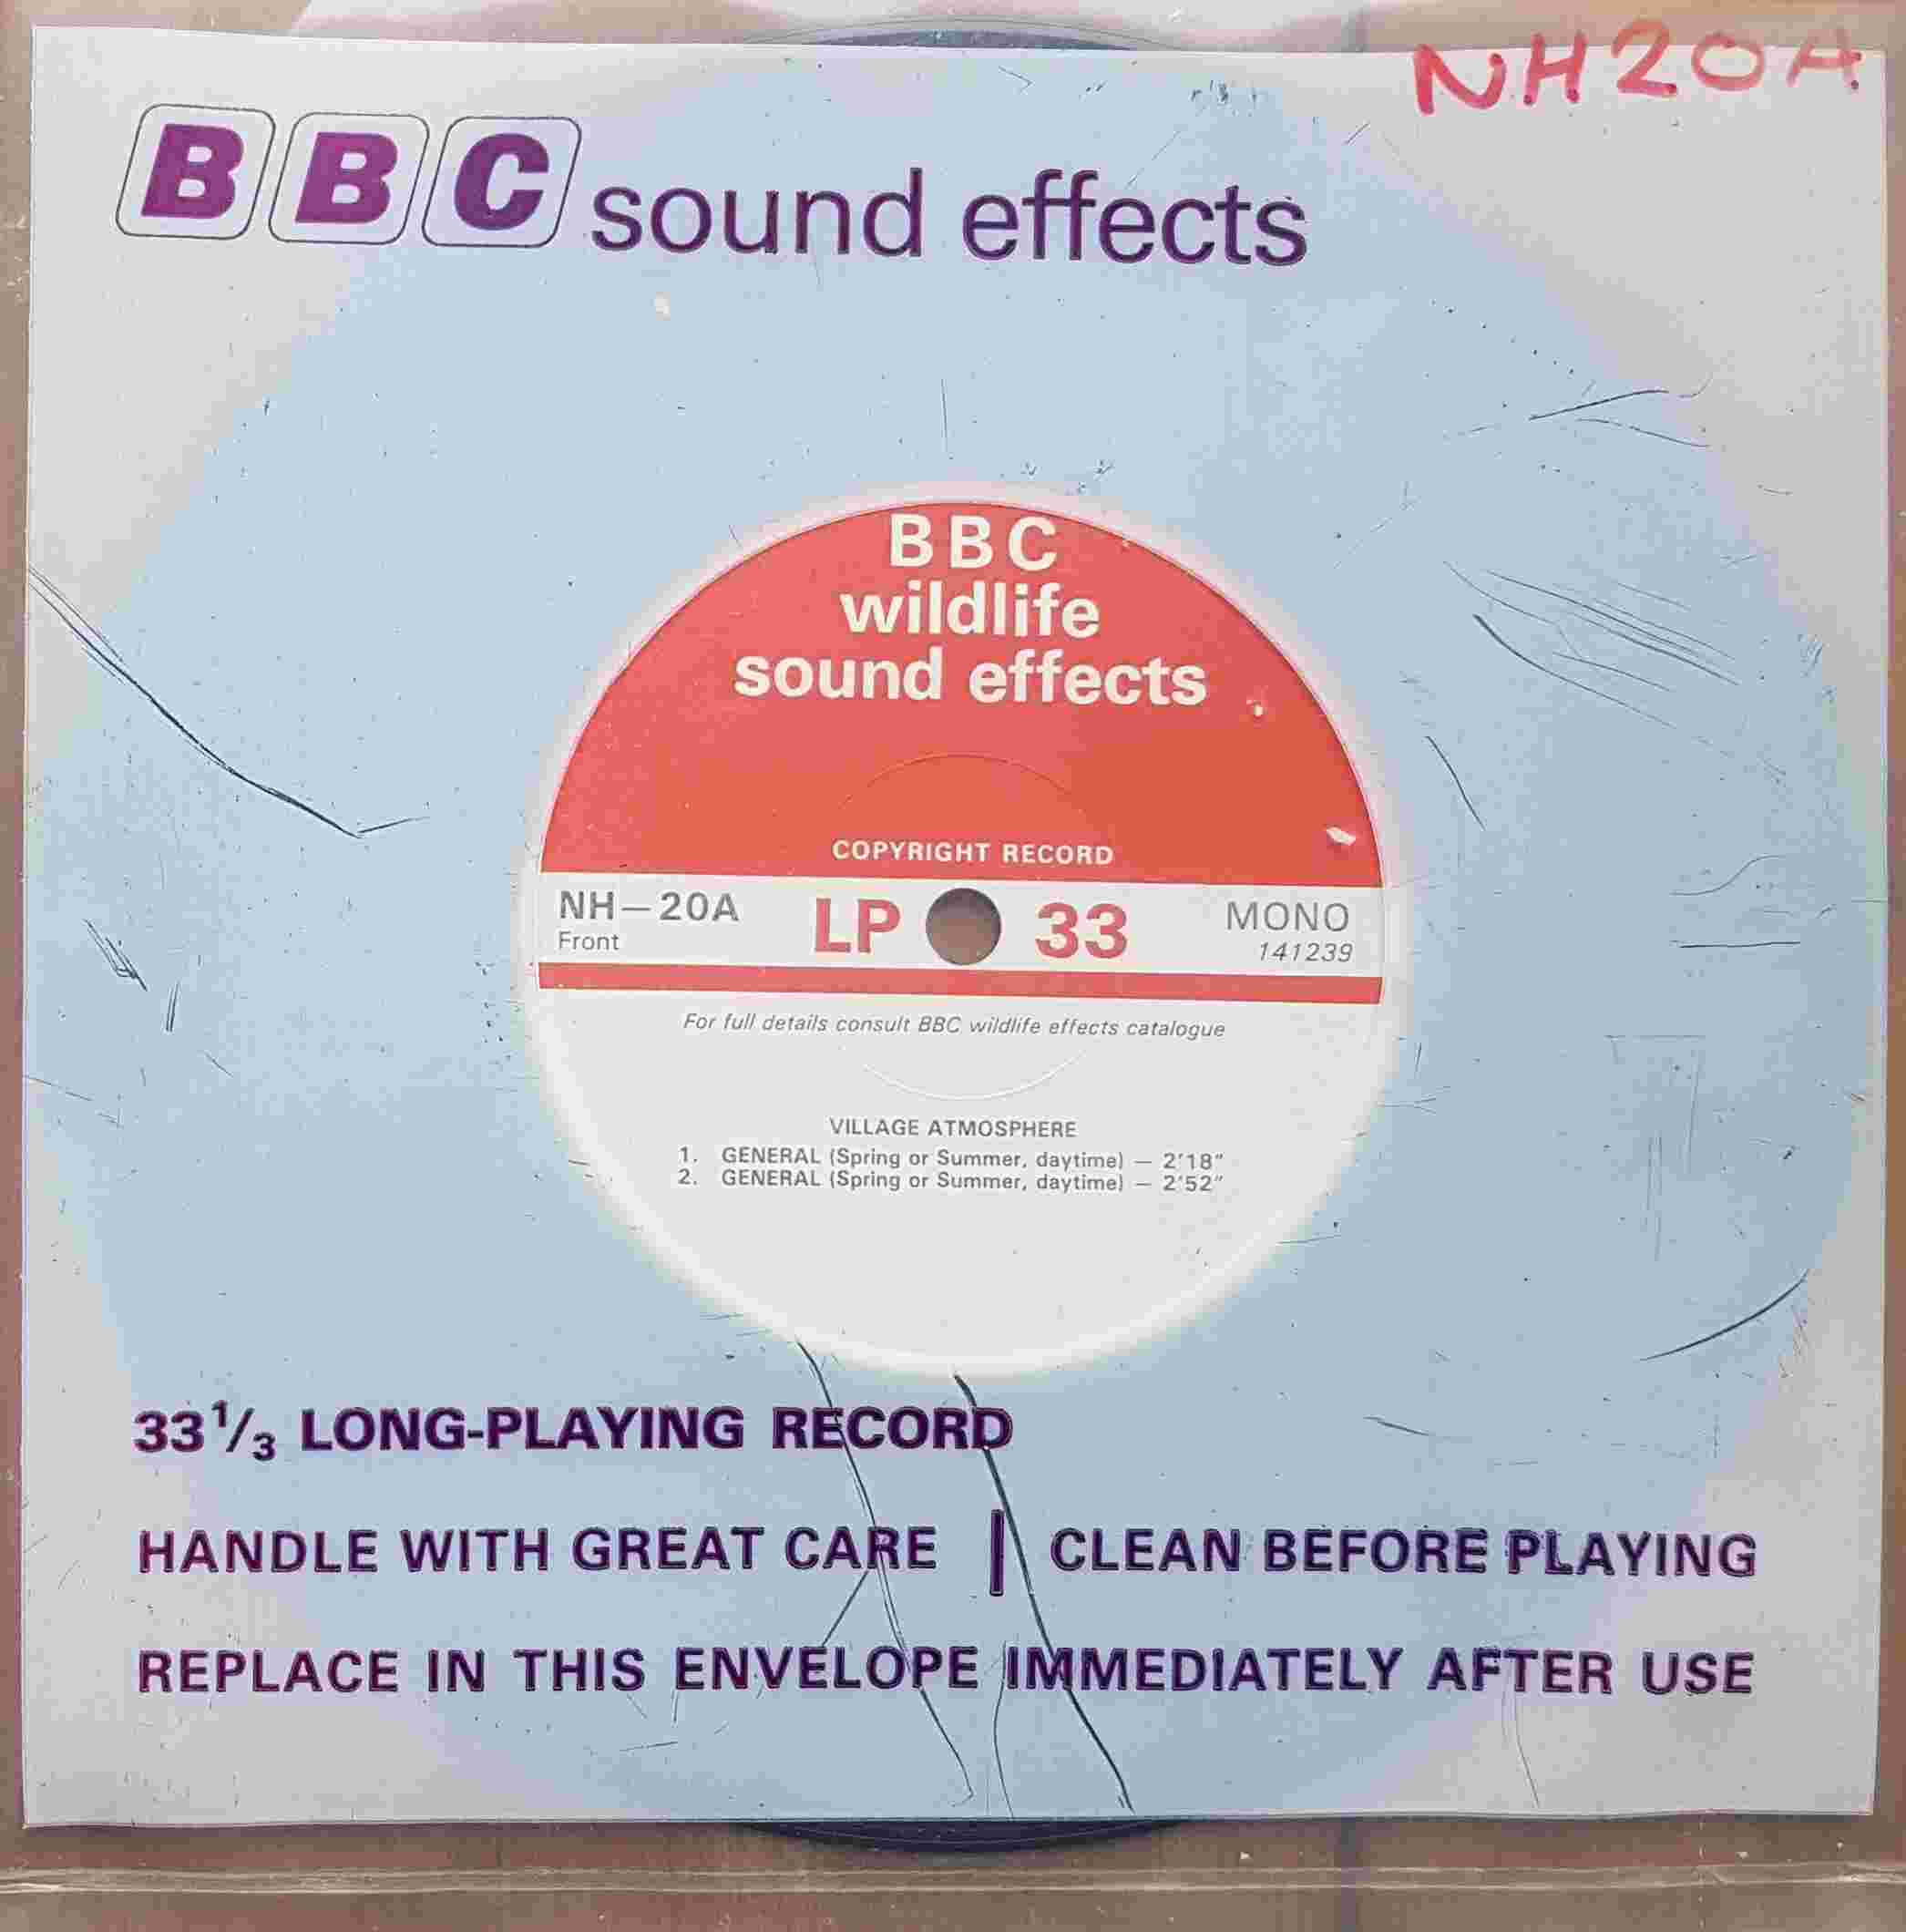 Picture of NH 20A Village atmosphere by artist Not registered from the BBC singles - Records and Tapes library